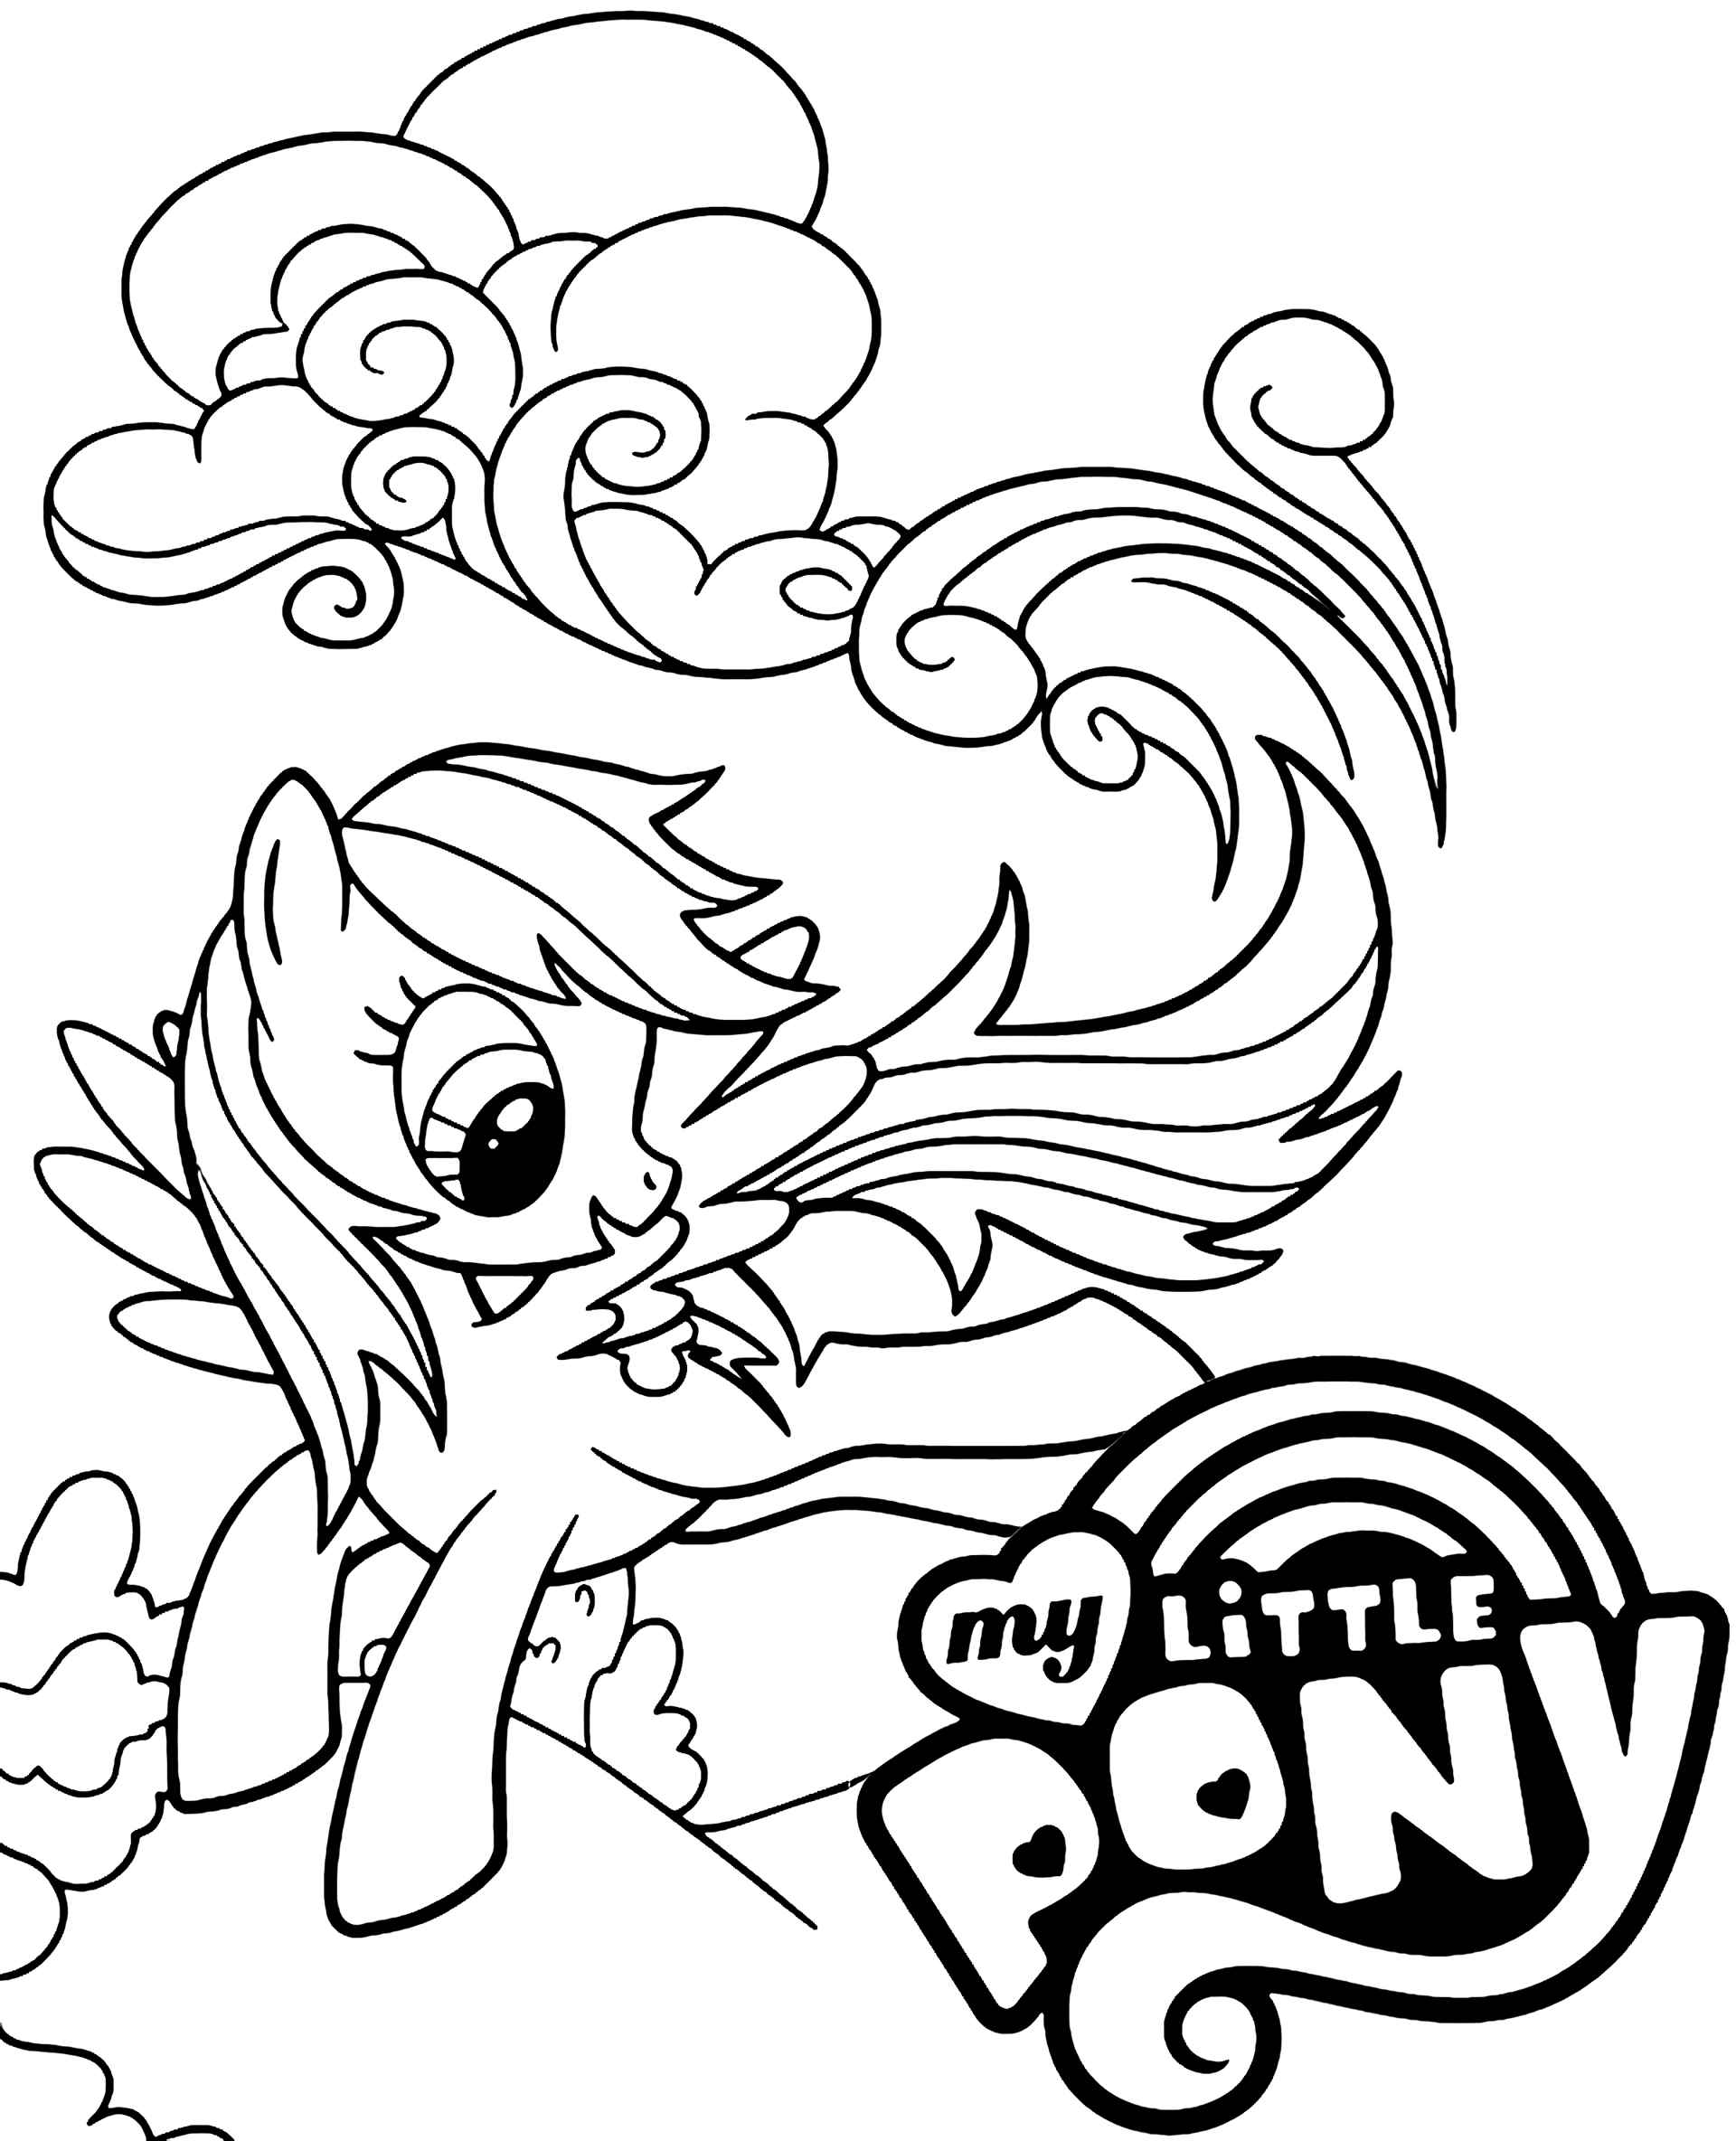 coloring sheet rainbowdash flies in the clouds with logo